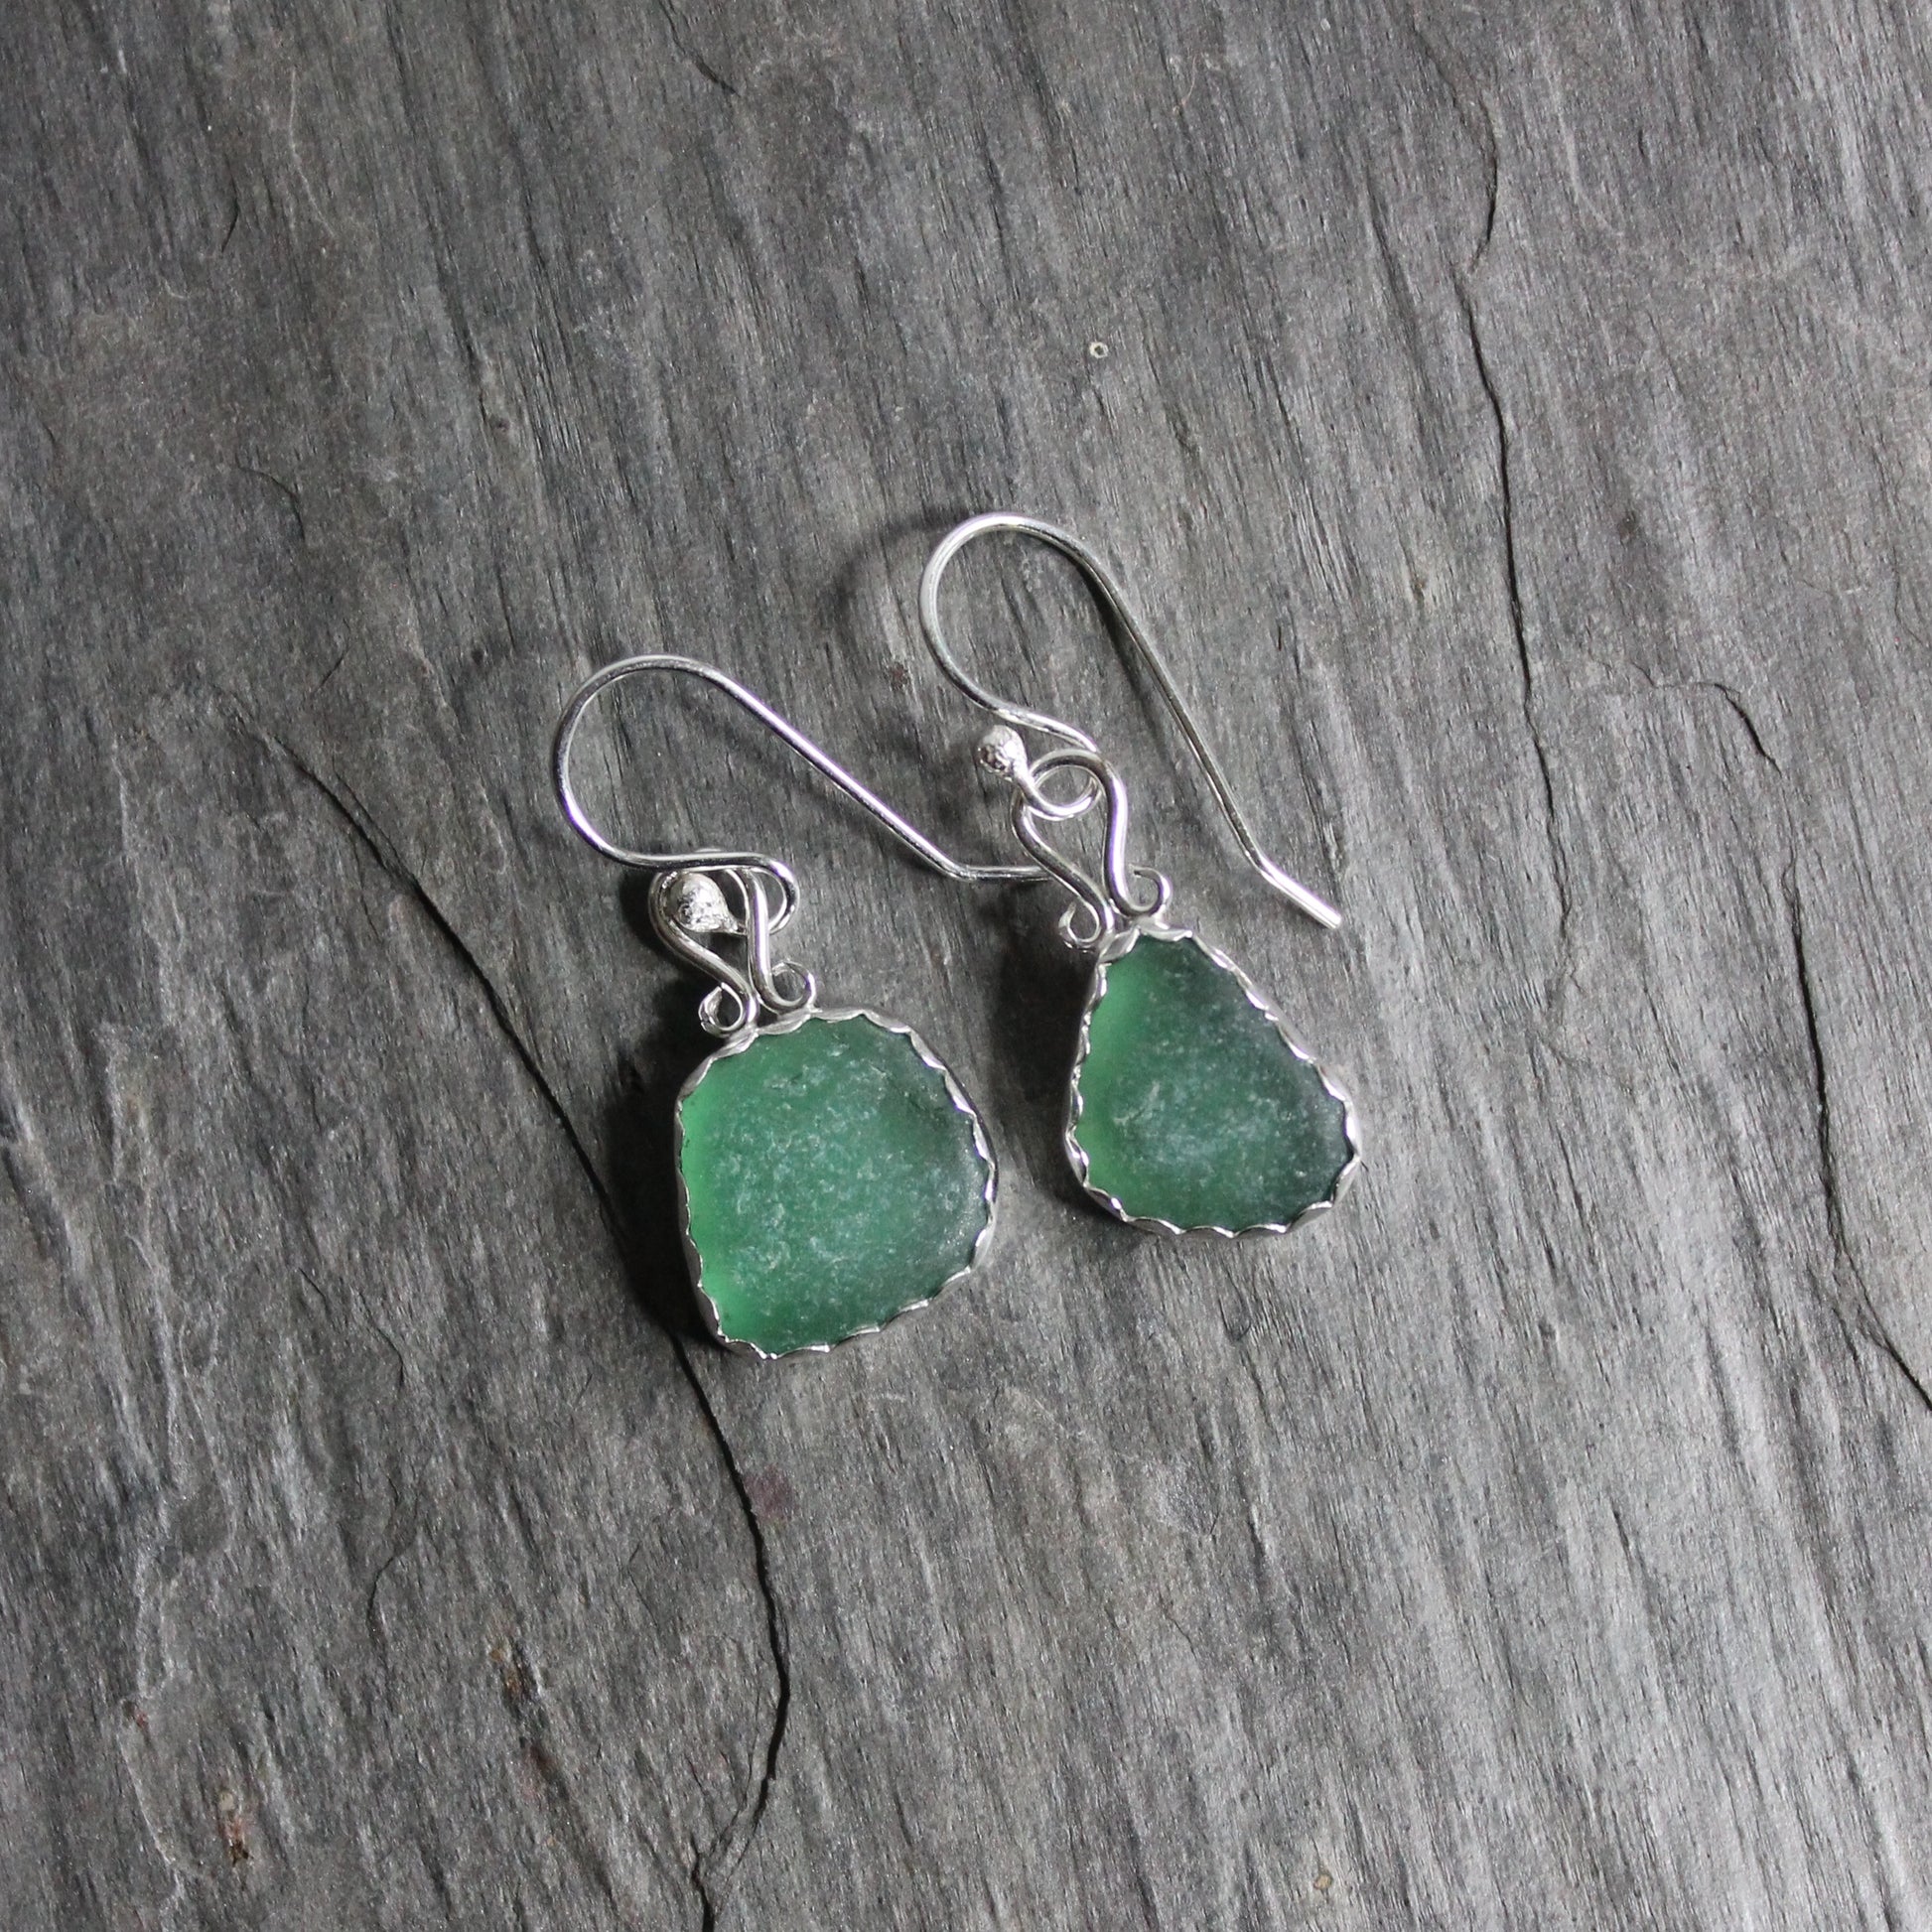 Dark green dangly sea glass earrings made with a sterling and fine silver scalloped bezel setting and a fancy bail on sterling silver ear wires. 